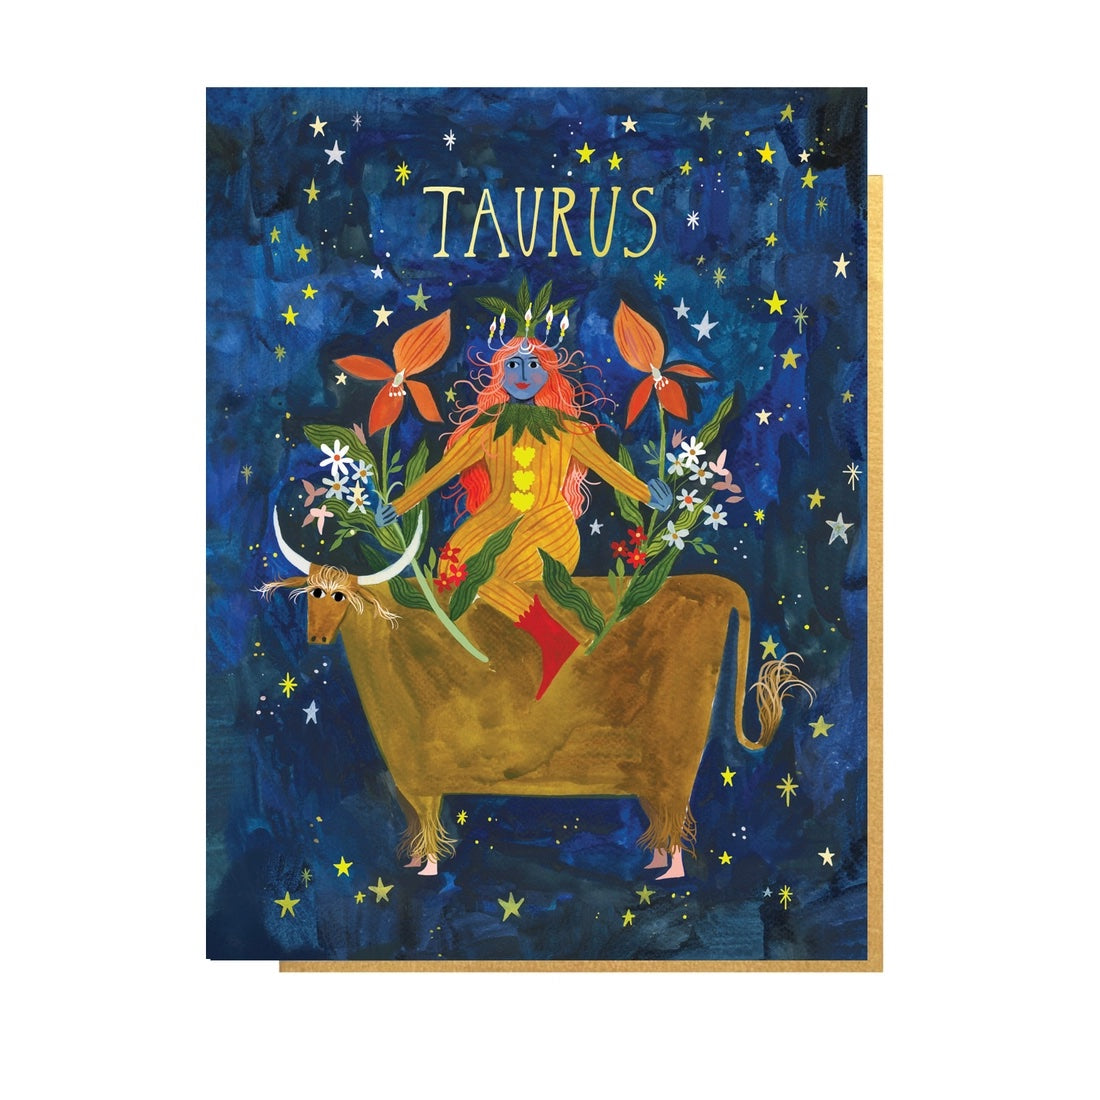 Folding card with illustration of woman on a a bull with flowers in a starry sky Taurus written above